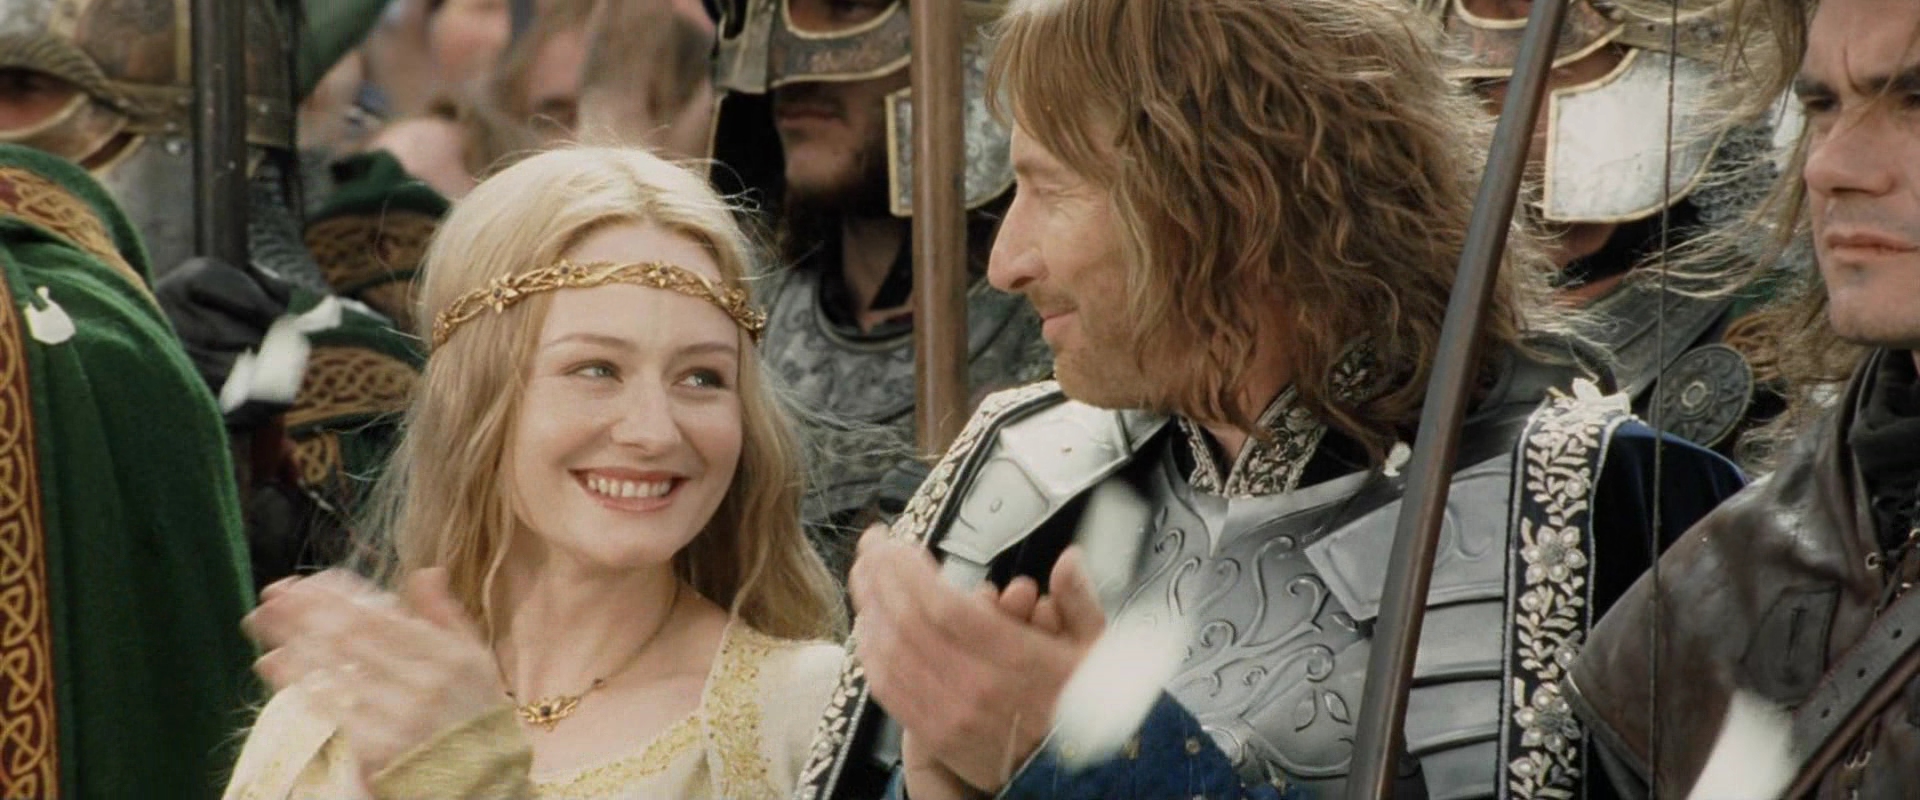 Eowyn and Faramir stand together at Aragorn's coronation.